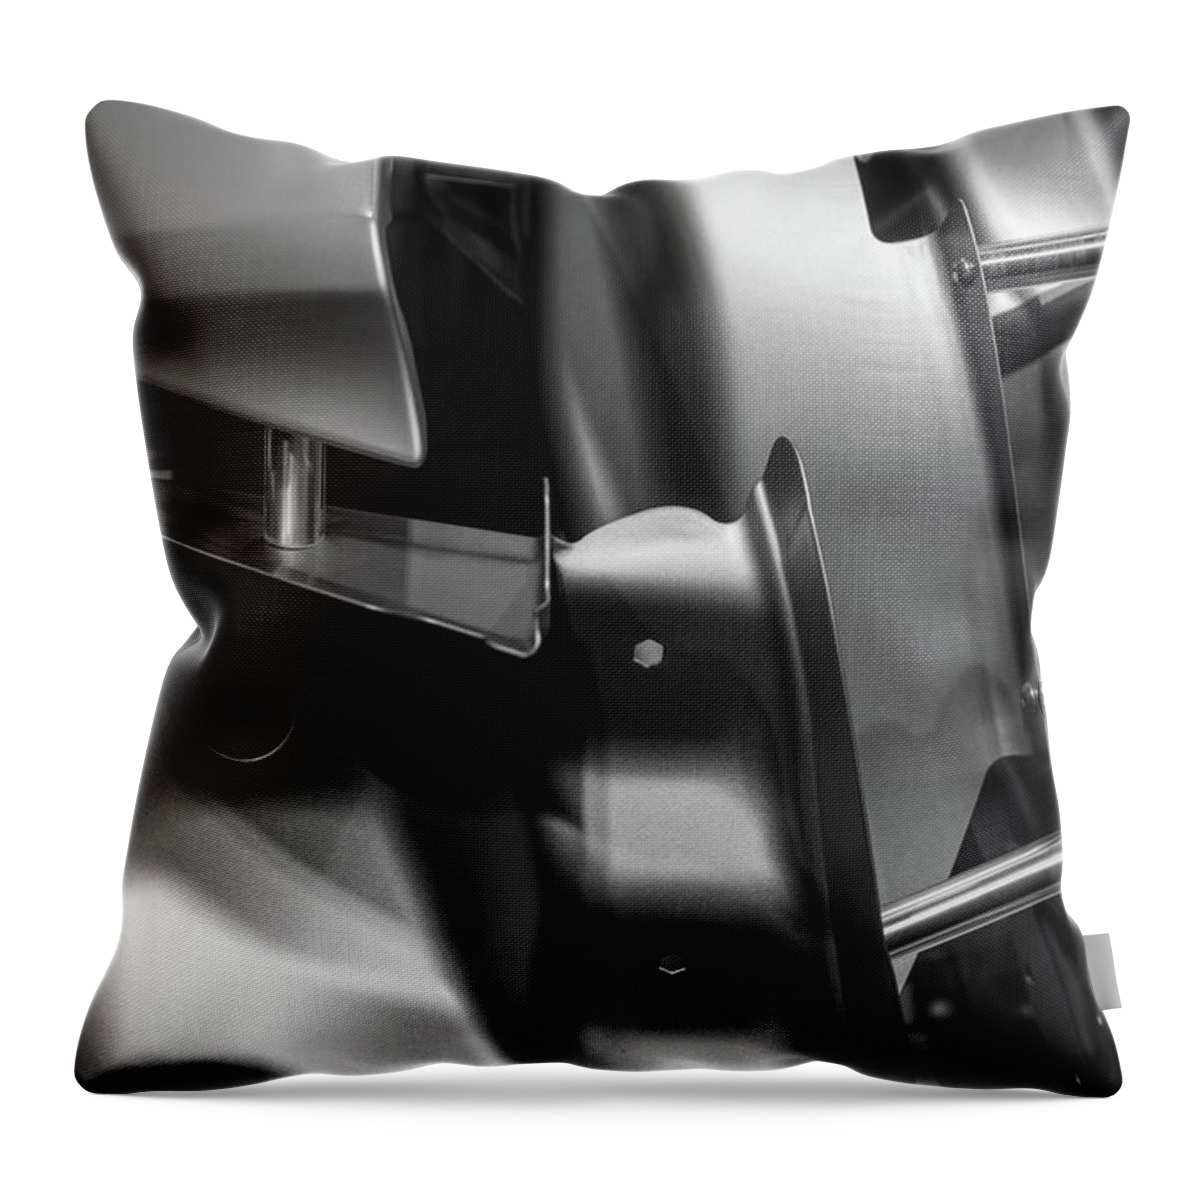 Tin Throw Pillow featuring the photograph Metal Parts Of A Car In Automotive by Wlad74